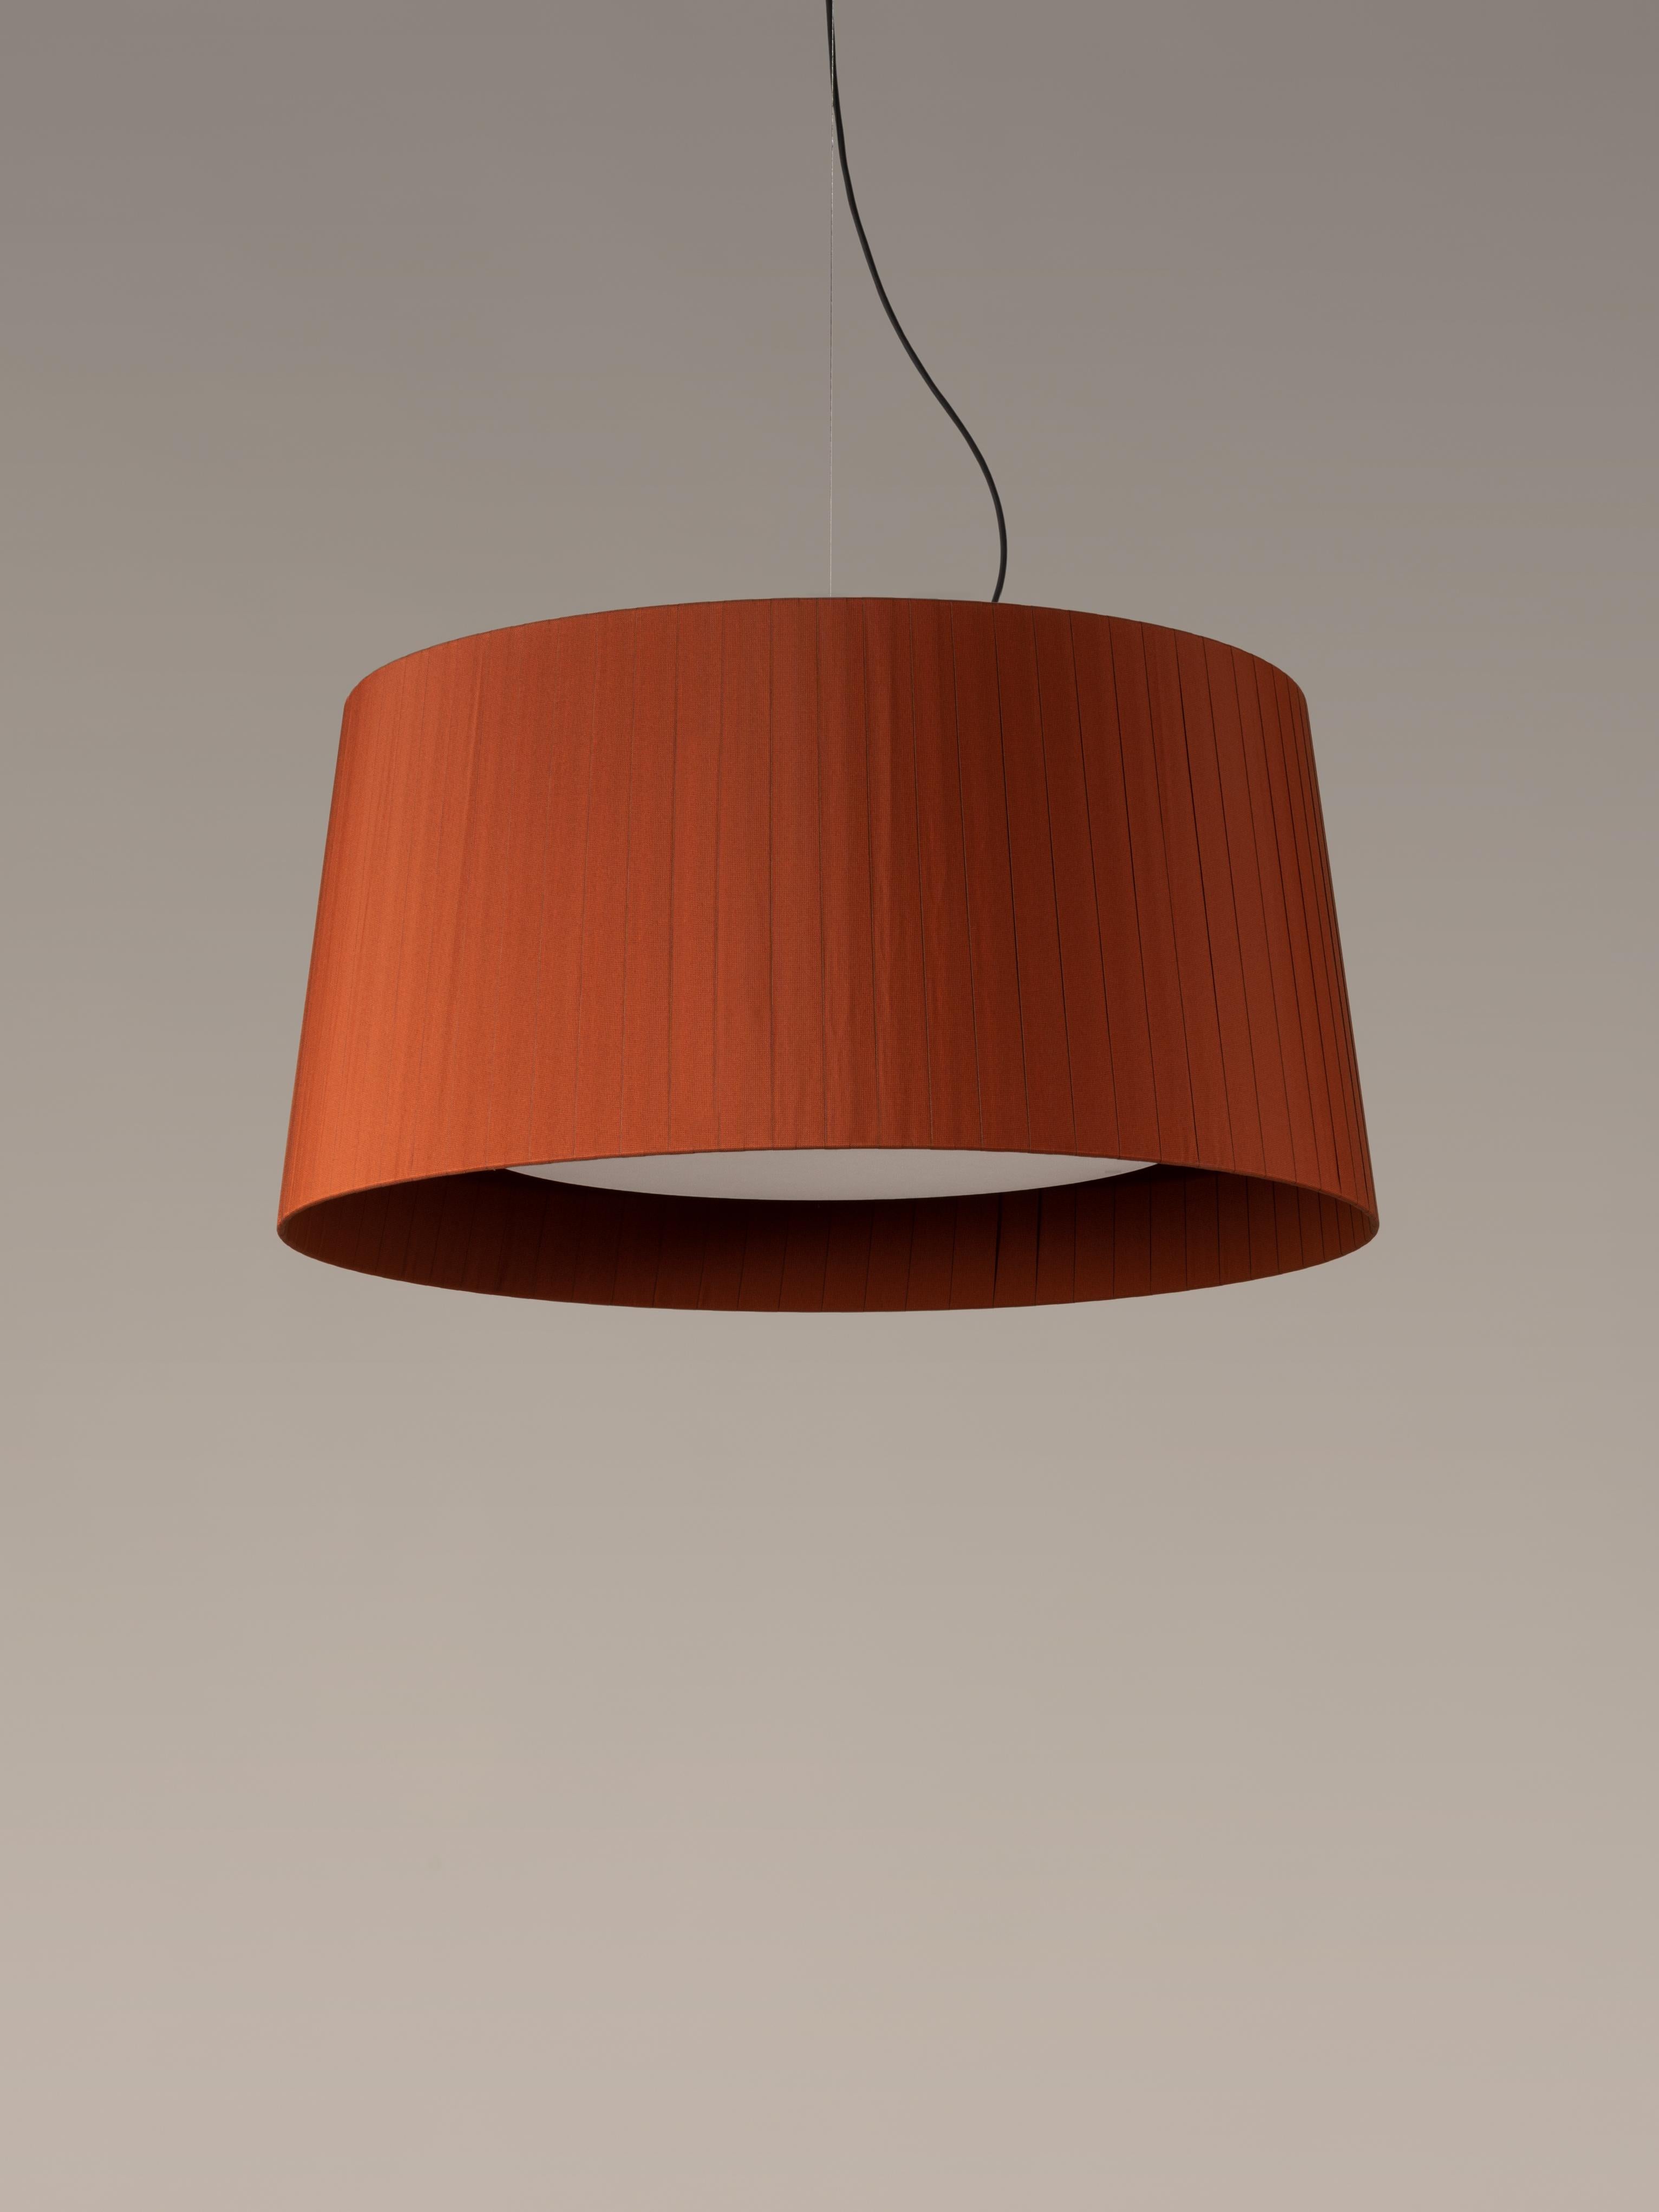 Terracotta GT7 pendant lamp by Santa & Cole
Dimensions: D 90 x H 44 cm
Materials: Metal, ribbon.
Available in other colors.

Designed for intermediate volumes and domestic areas, GT7 is larger, requiring a reinforced structure that adds a metal